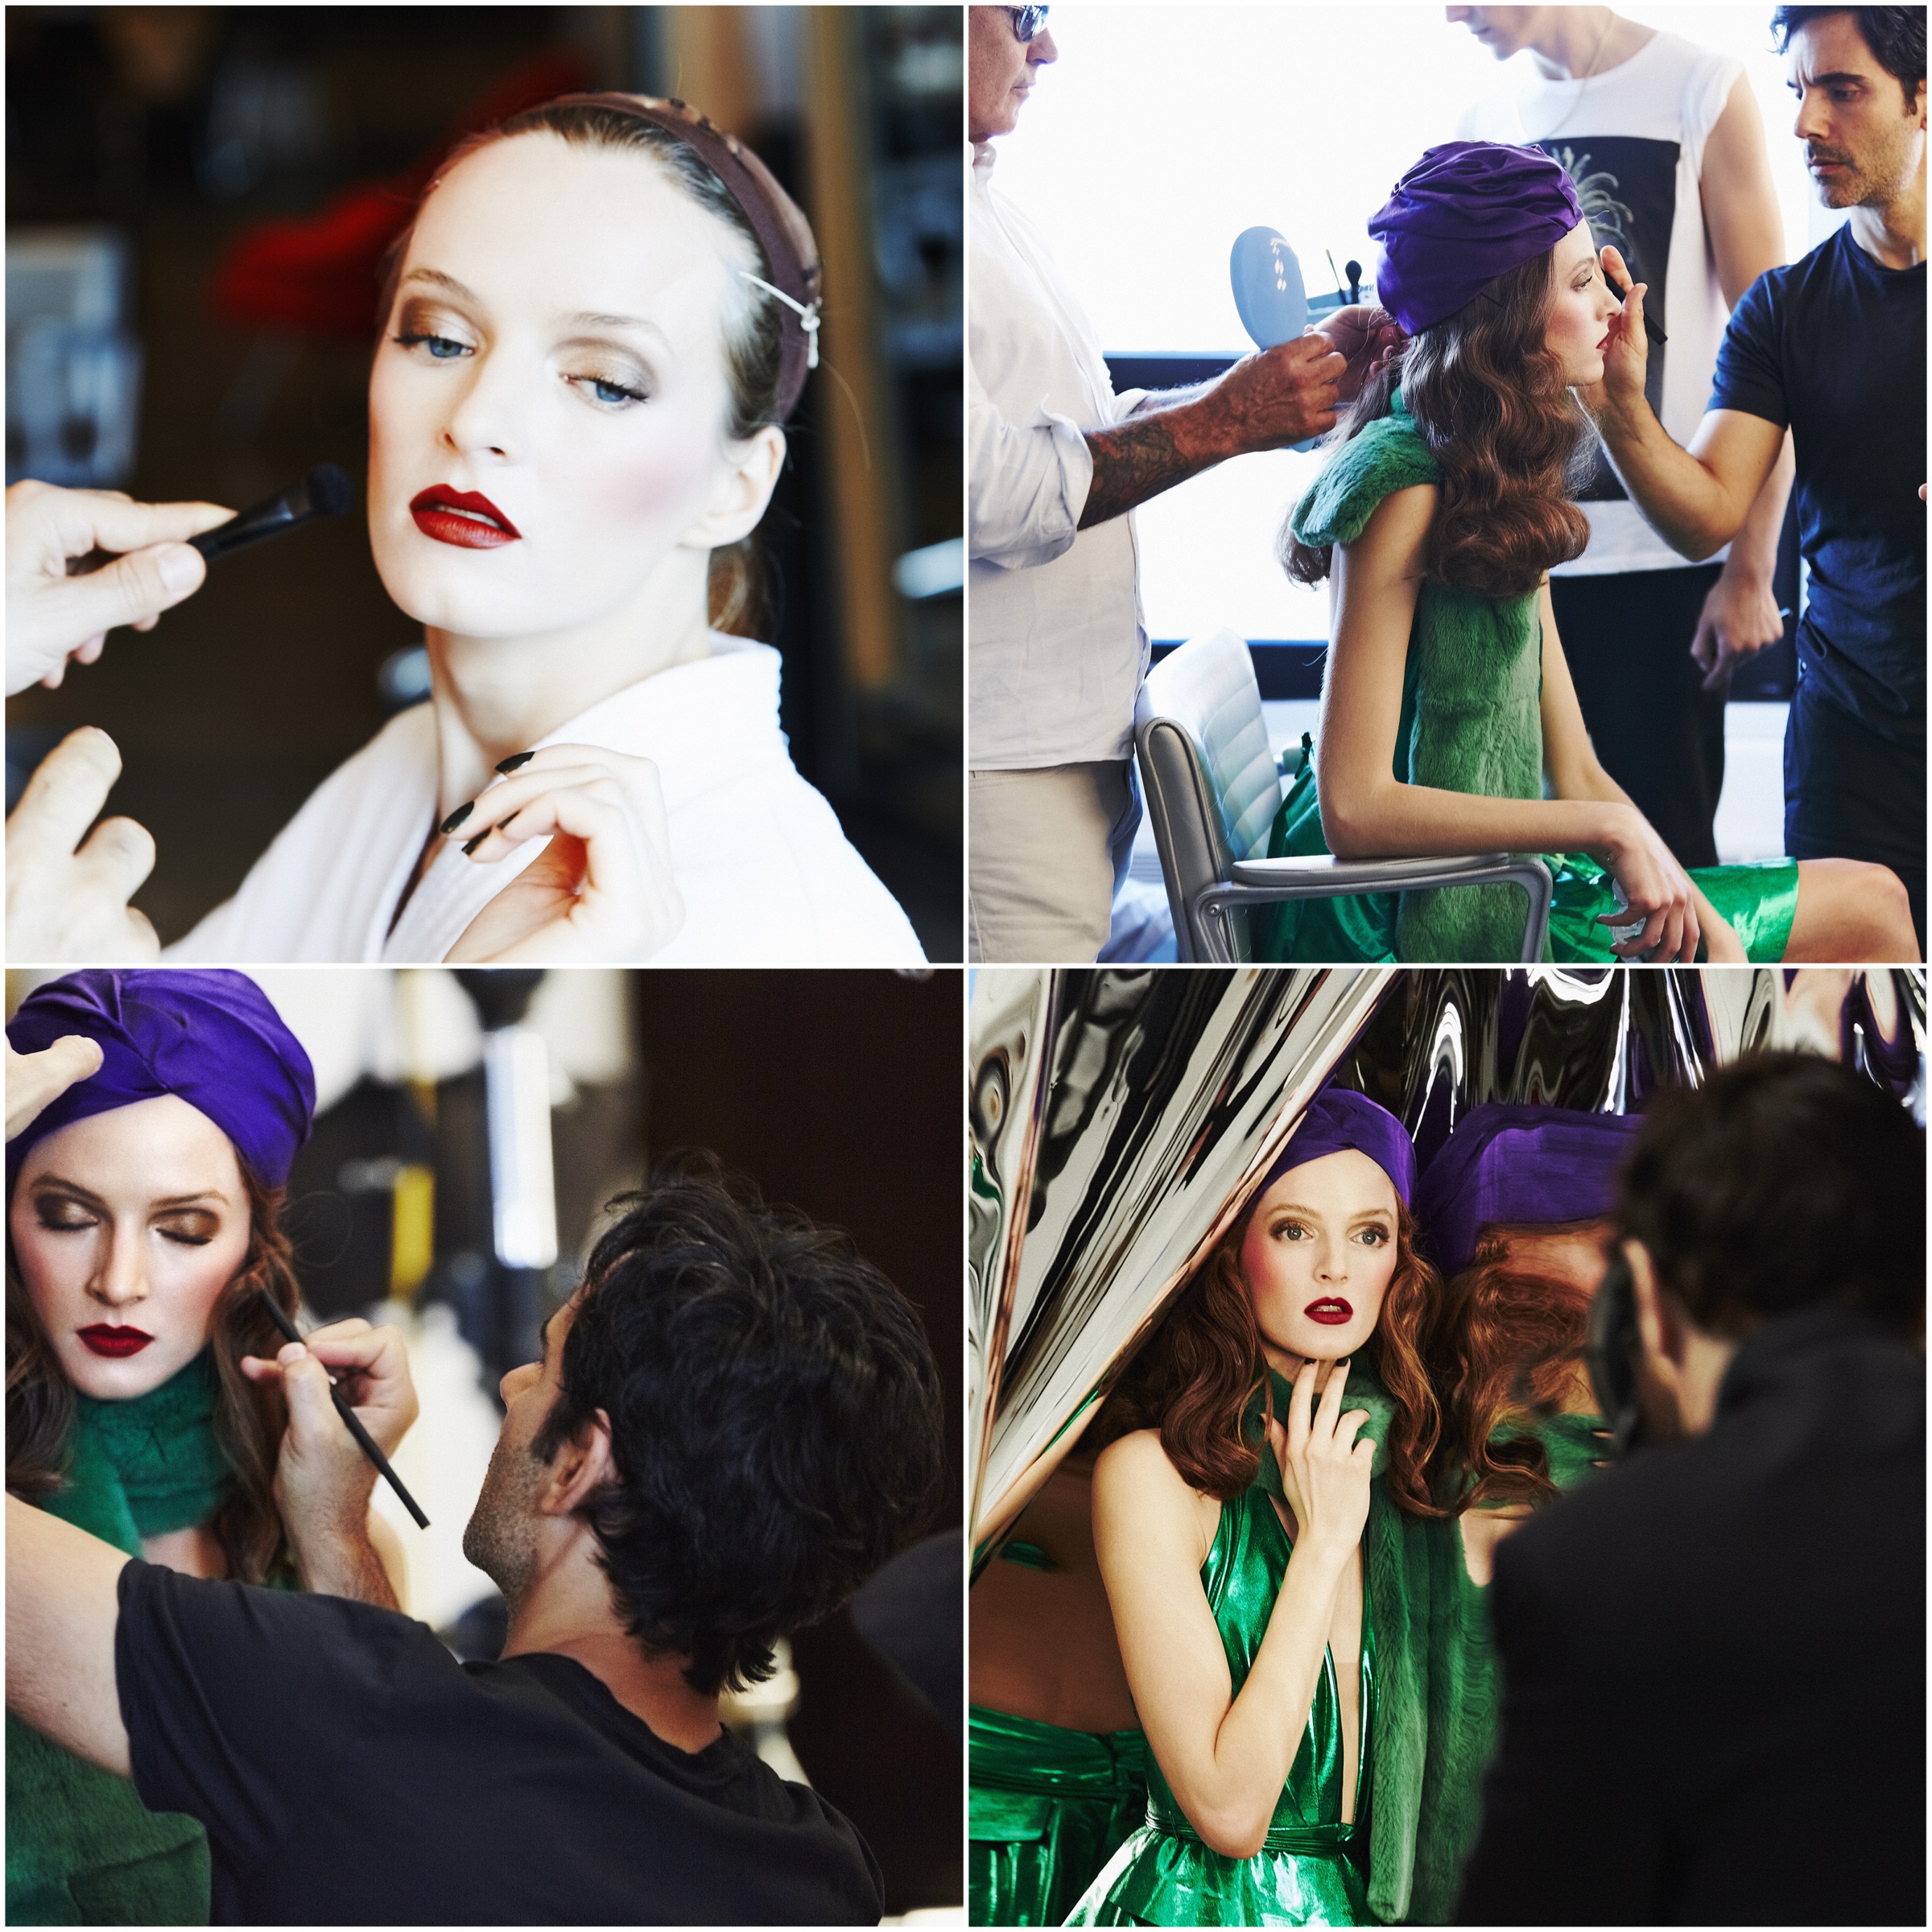 NARS Fall 2015 Color Collection Campaign Image Behind the Scenes